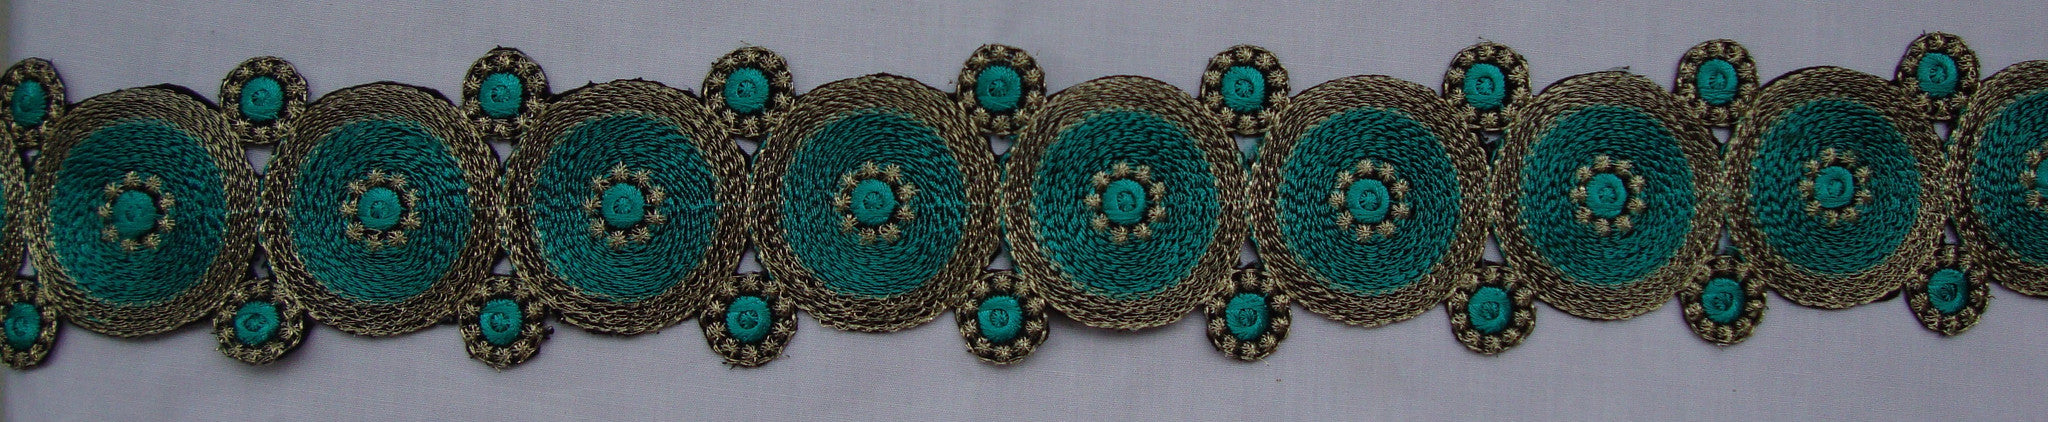 Teal Embroidered Trim (Sold as a 2 yard piece)